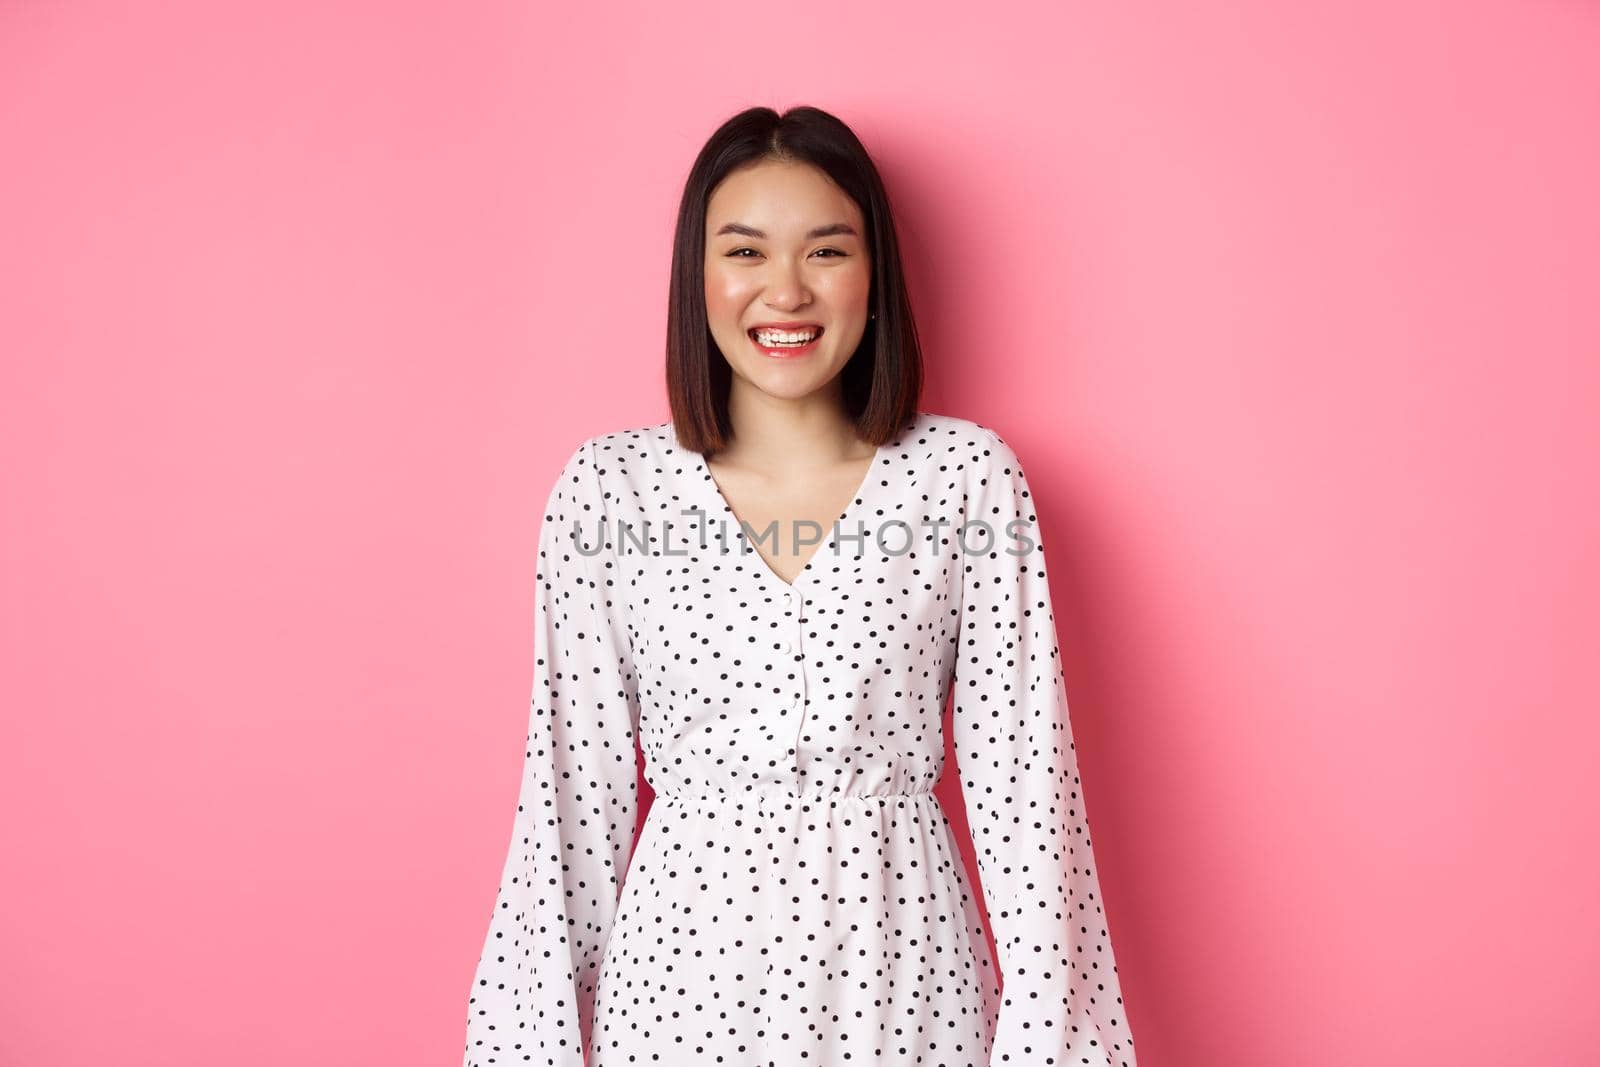 Happy korean woman in dress looking at camera, smiling and laughing with sincere expression, standing over pink background. Copy space